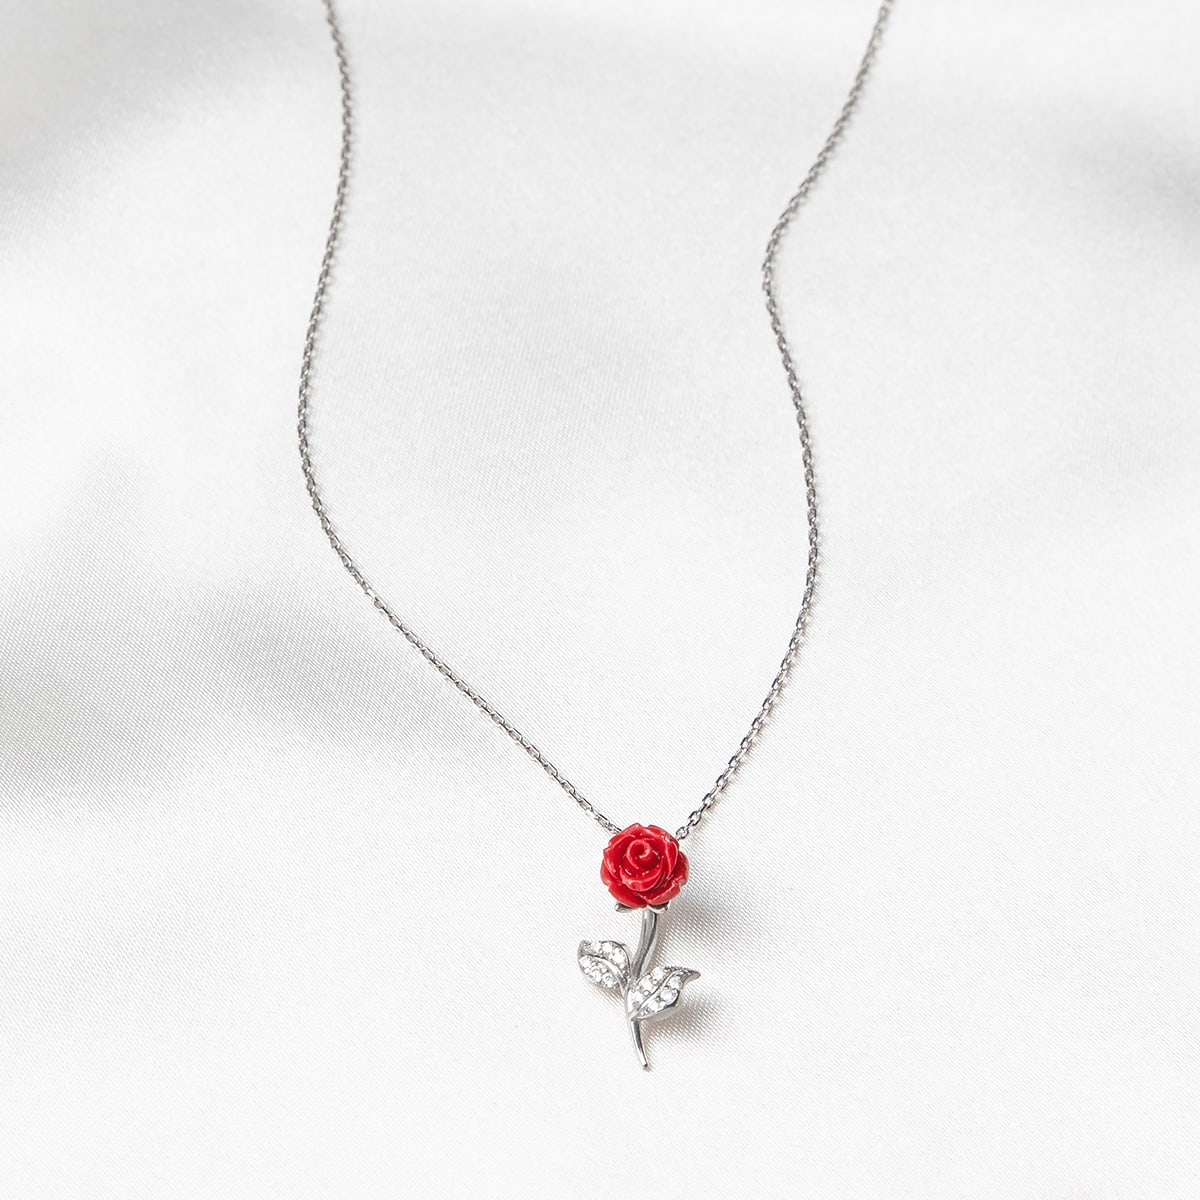 To My Daughter. Never Forget (From Mom) - Red Rose Necklace Gift Set